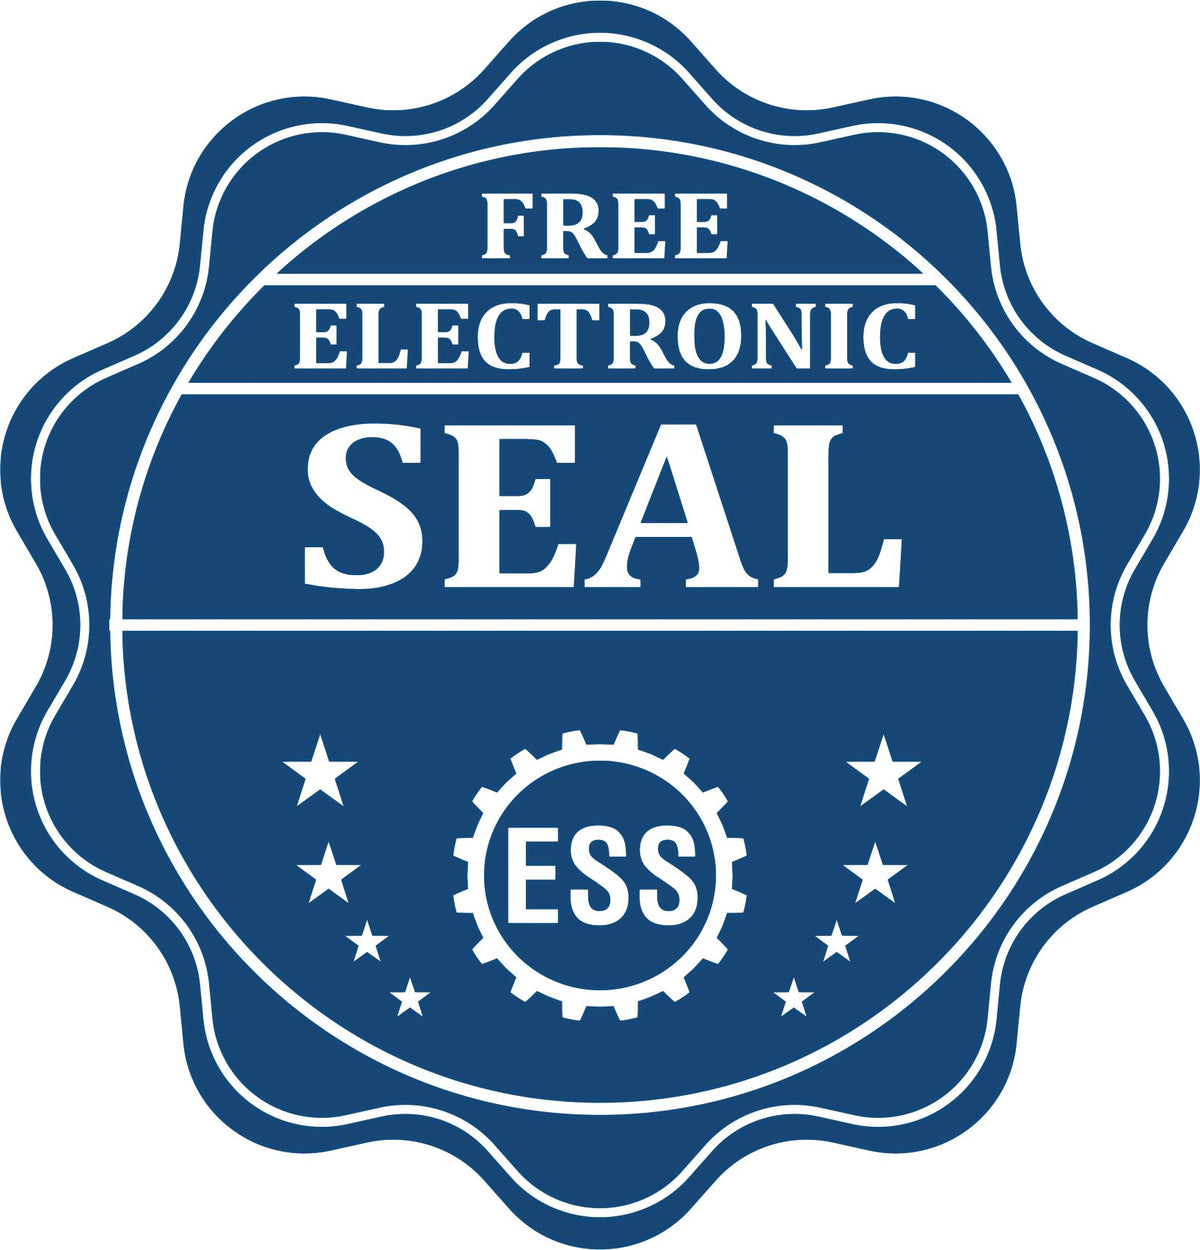 A badge showing a free electronic seal for the Colorado Professional Engineer Seal Stamp with stars and the ESS gear on the emblem.